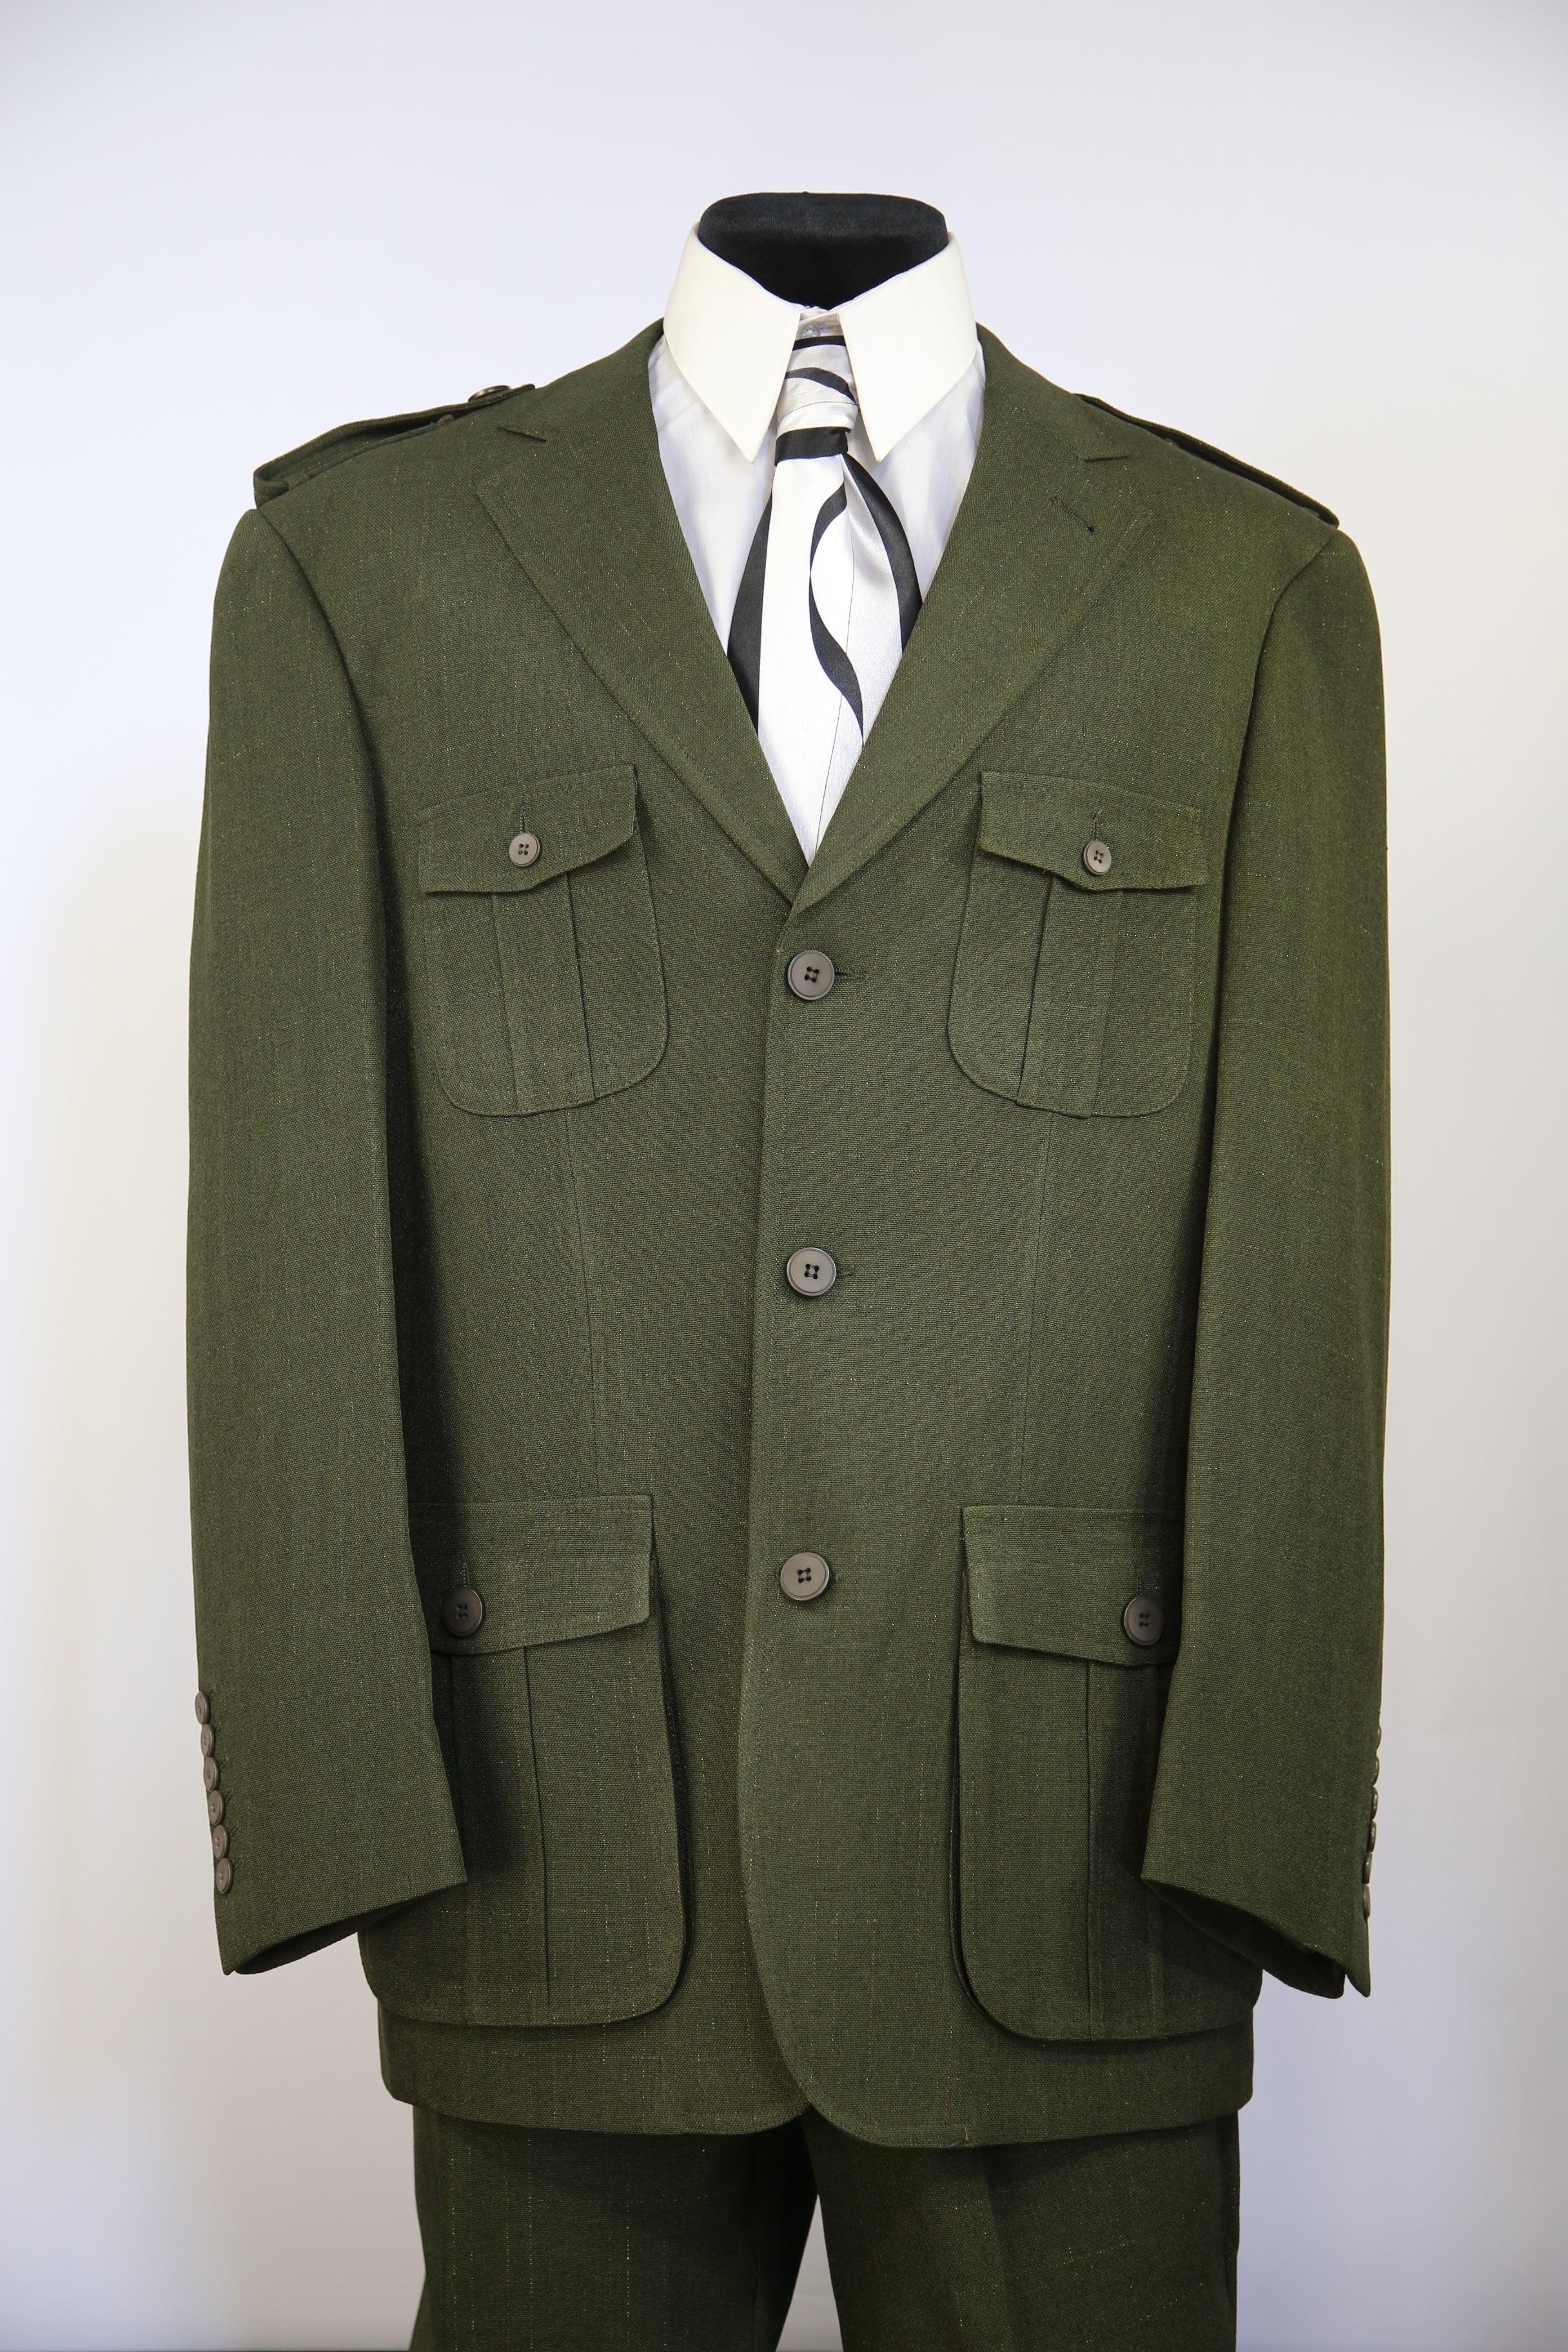 Naval Style Wool 2pc Zoot Suit Set